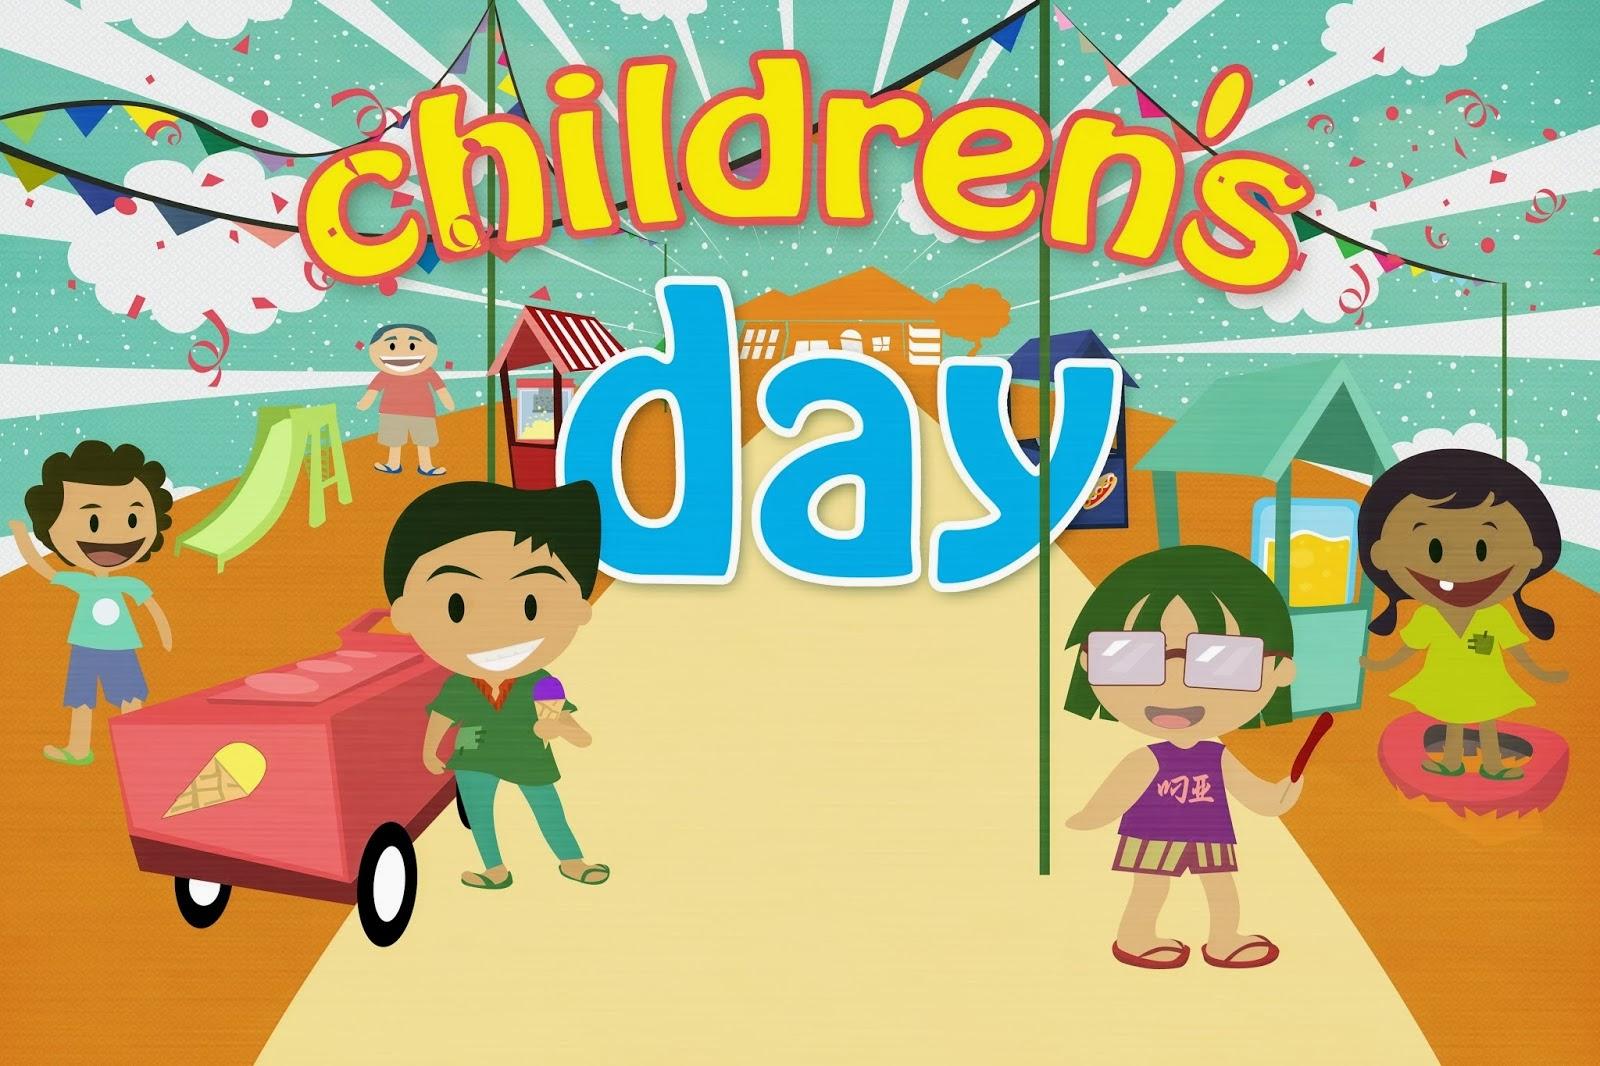 Happy Children's Day 2016 Quotes, SMS, बाल दिवस